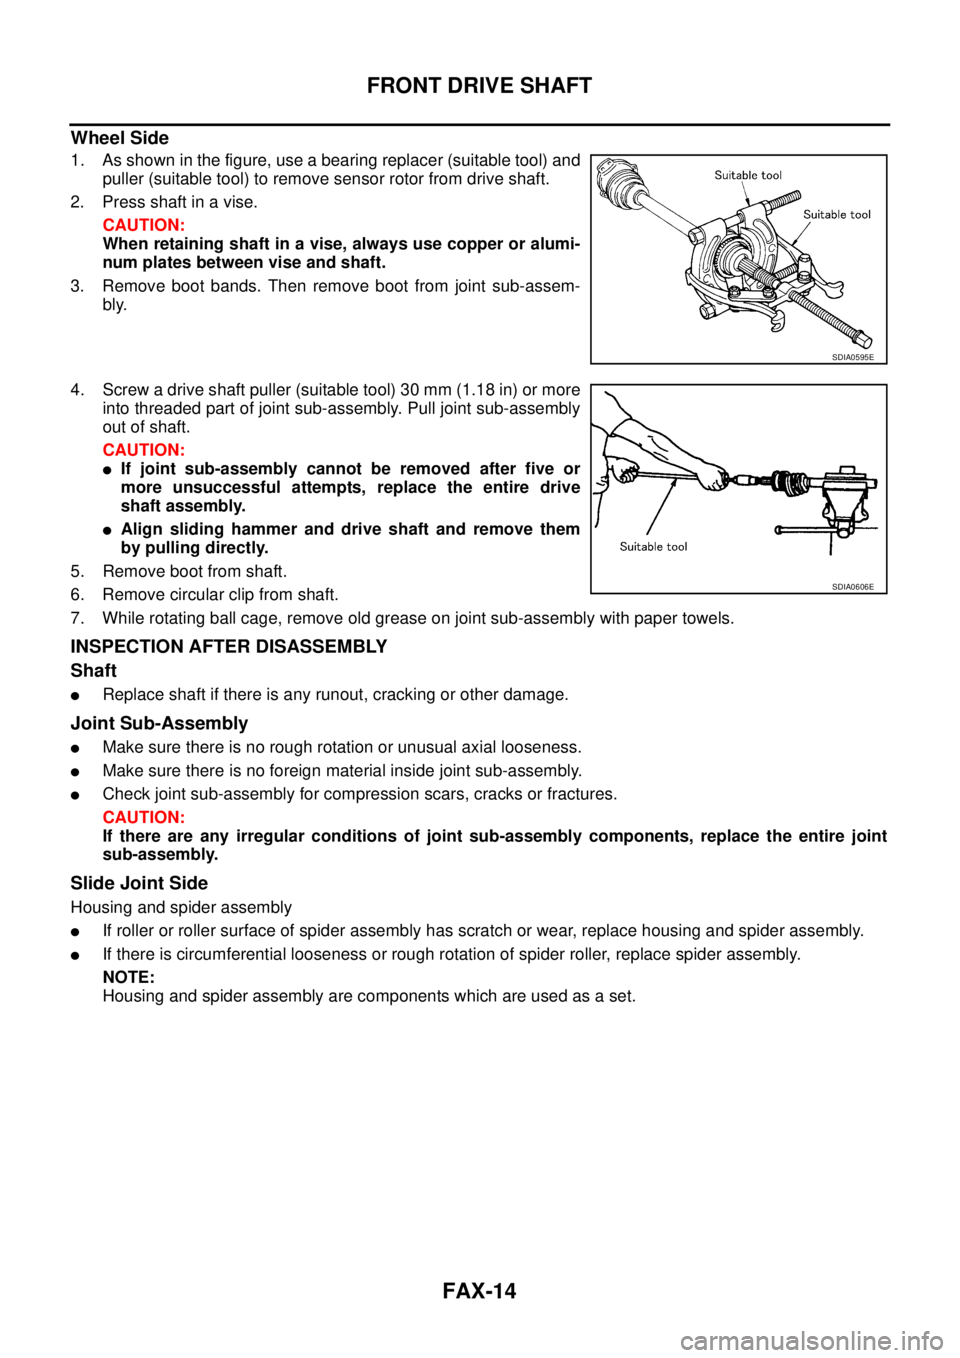 NISSAN X-TRAIL 2003  Service Repair Manual FAX-14
FRONT DRIVE SHAFT
 
Wheel Side
1. As shown in the figure, use a bearing replacer (suitable tool) and
puller (suitable tool) to remove sensor rotor from drive shaft.
2. Press shaft in a vise.
CA